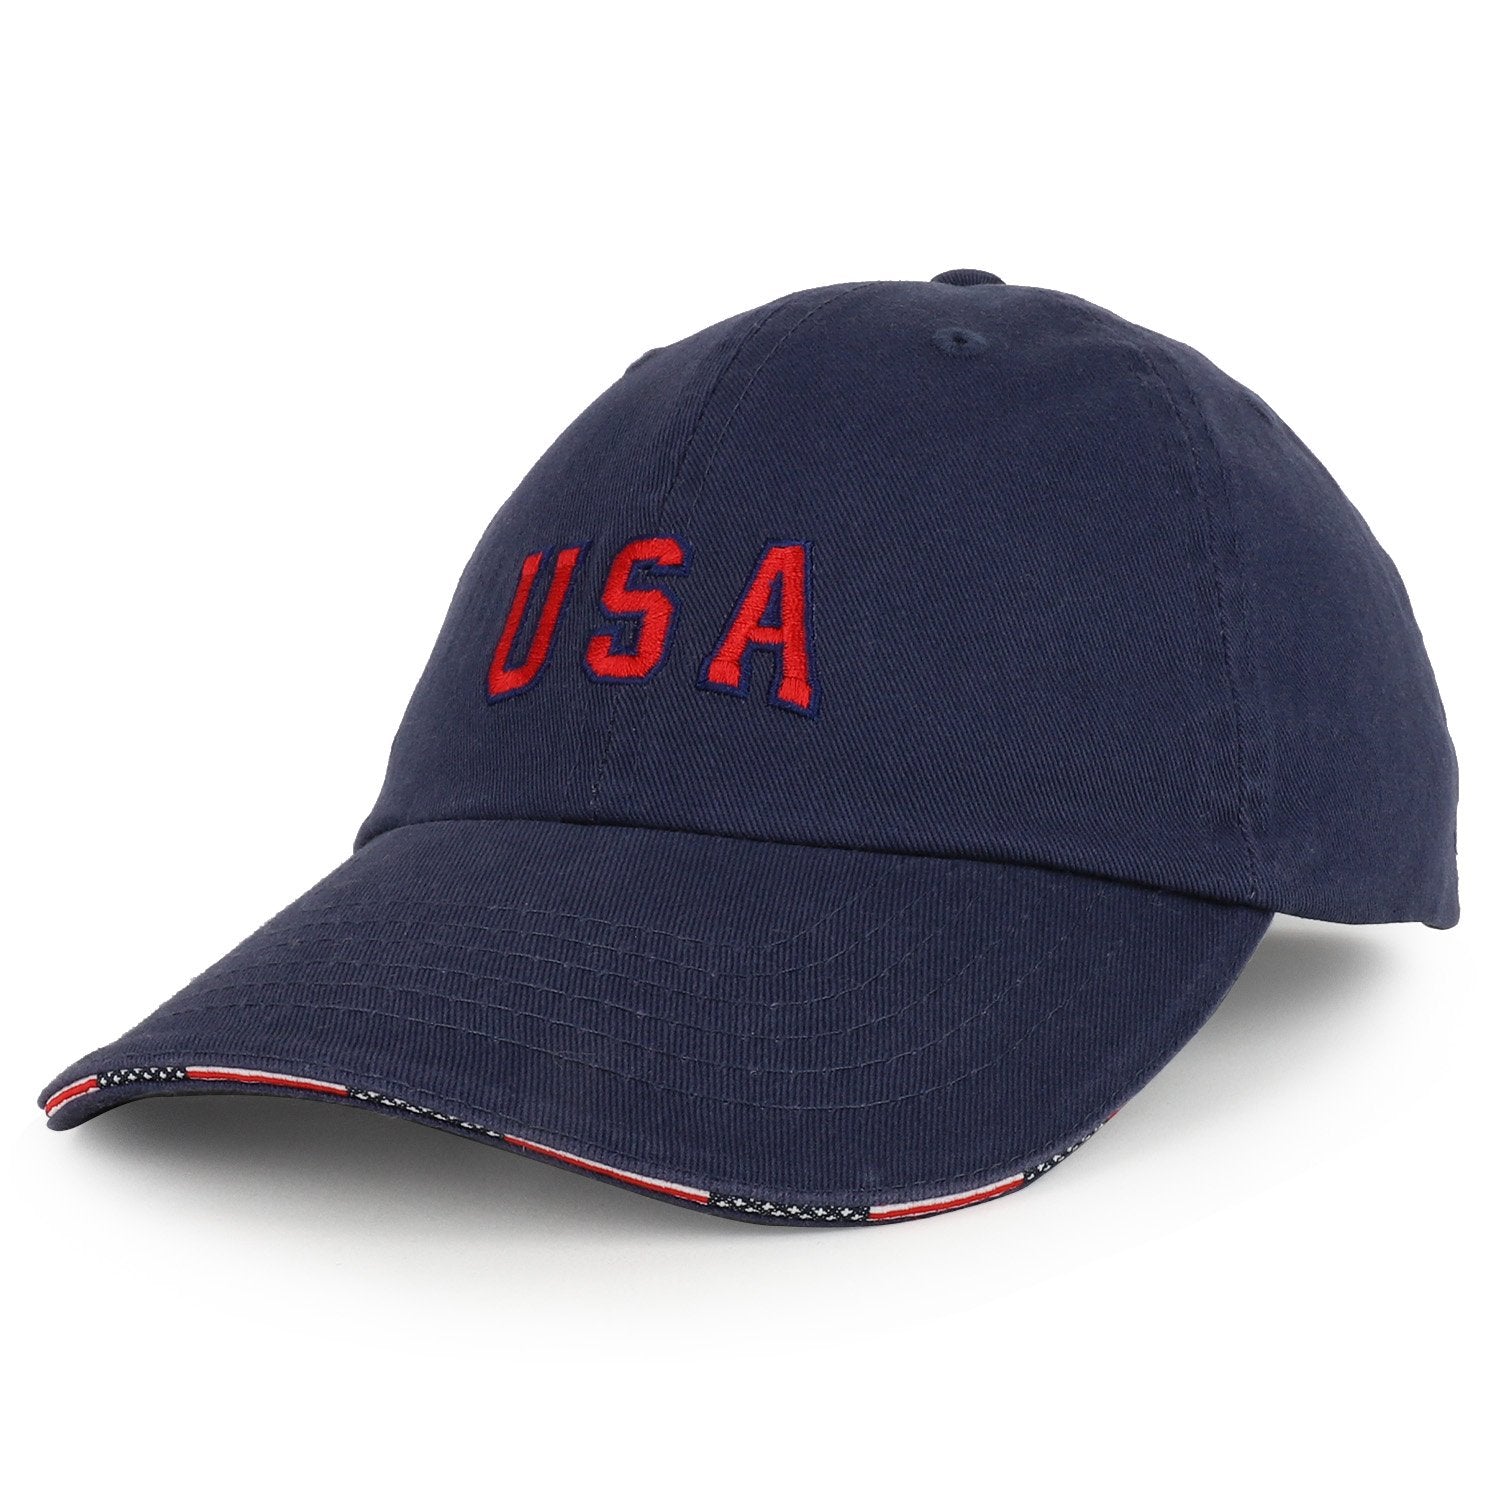 Armycrew USA Embroidered Washed Cotton Twill Unstructured Sandwich Bill Baseball Cap